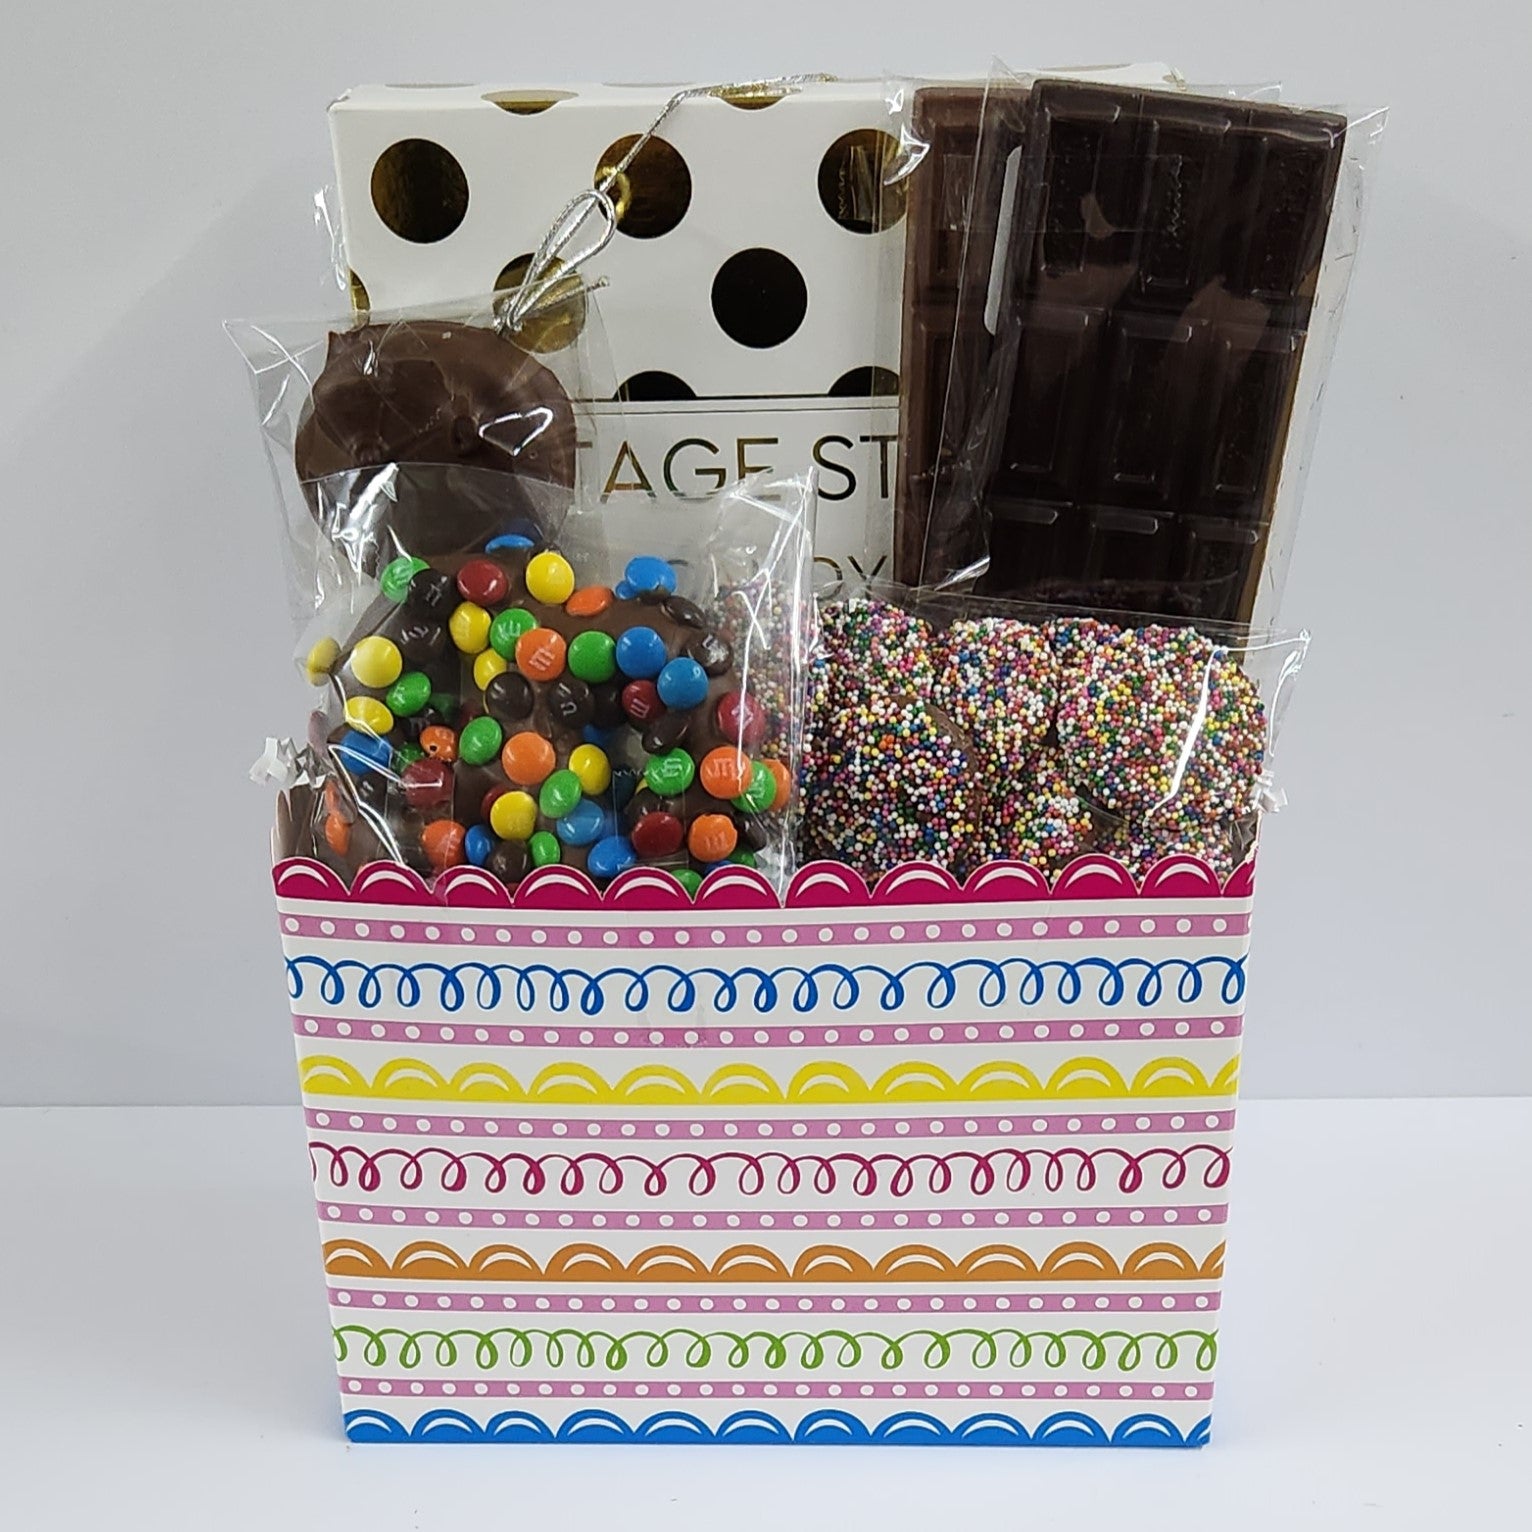 Sweet Swirls Gift Baskets includes a 16-piece assortment of creams, caramels, meltaways and truffles, milk & dark chocolate candy bars, milk chocolate covered Oreos, milk chocolate nonpareils and a milk chocolate covered pretzels coated in mini M & M's. 